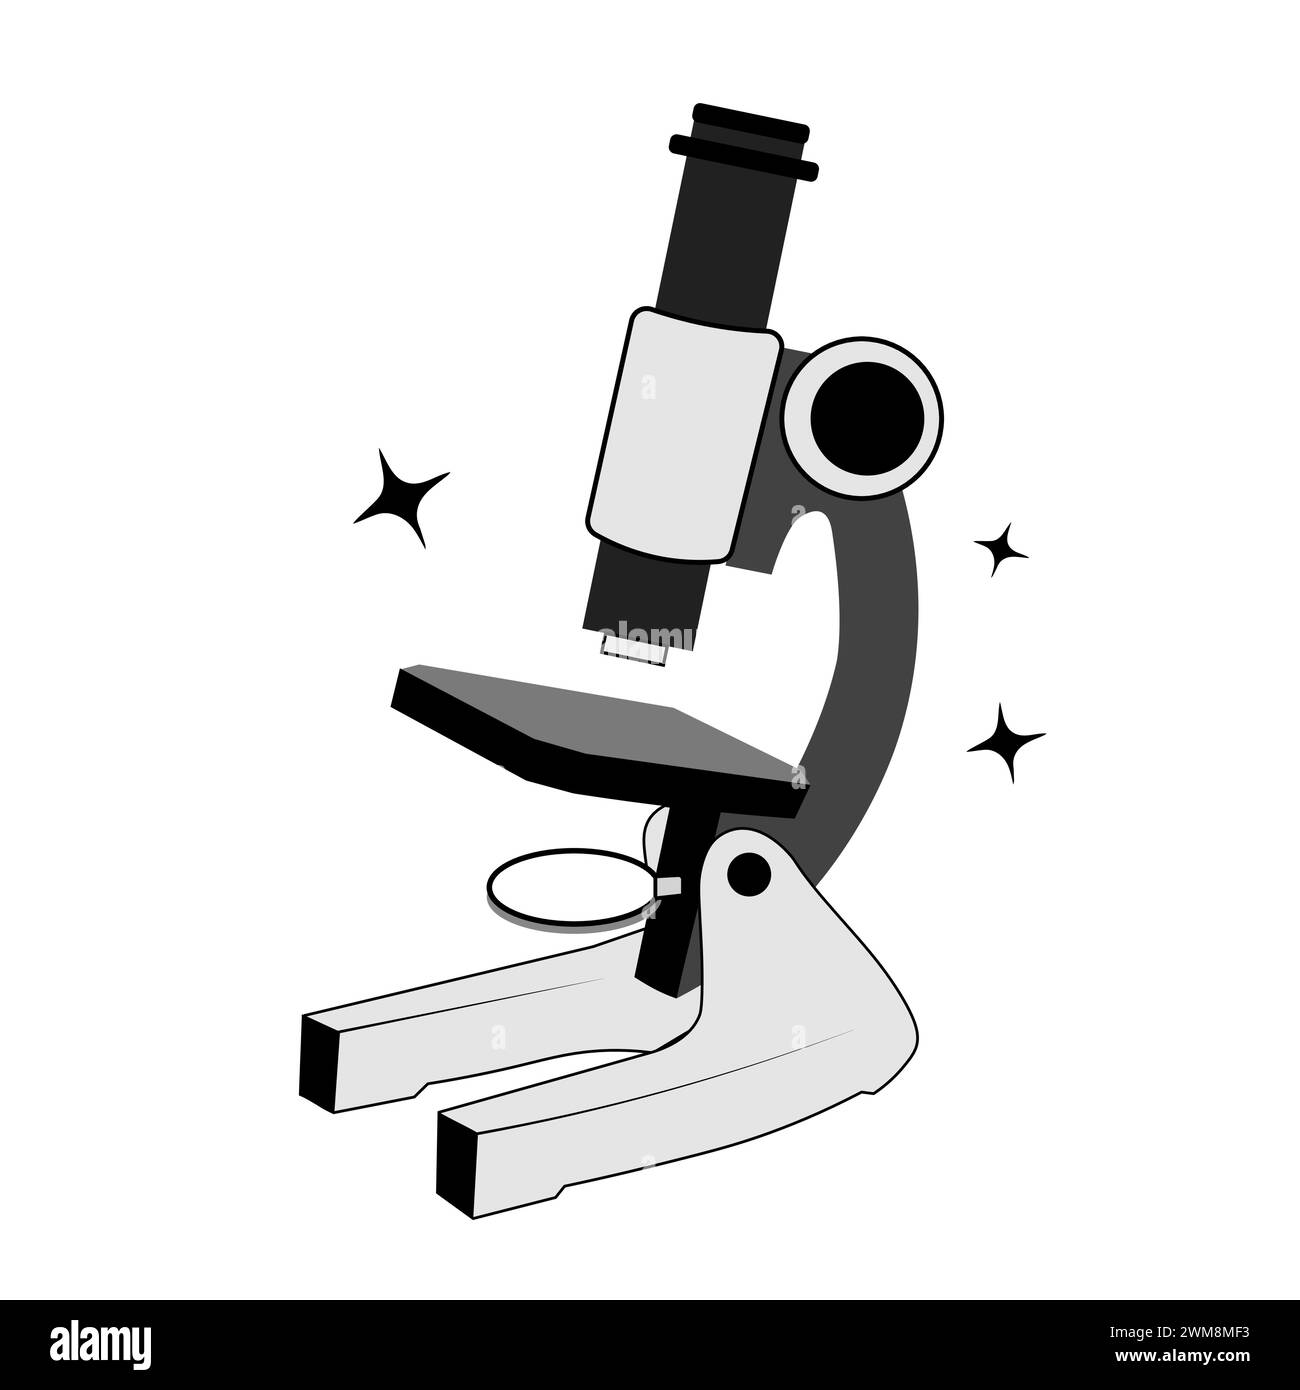 Microscope on white background. Doodle Stock Vector